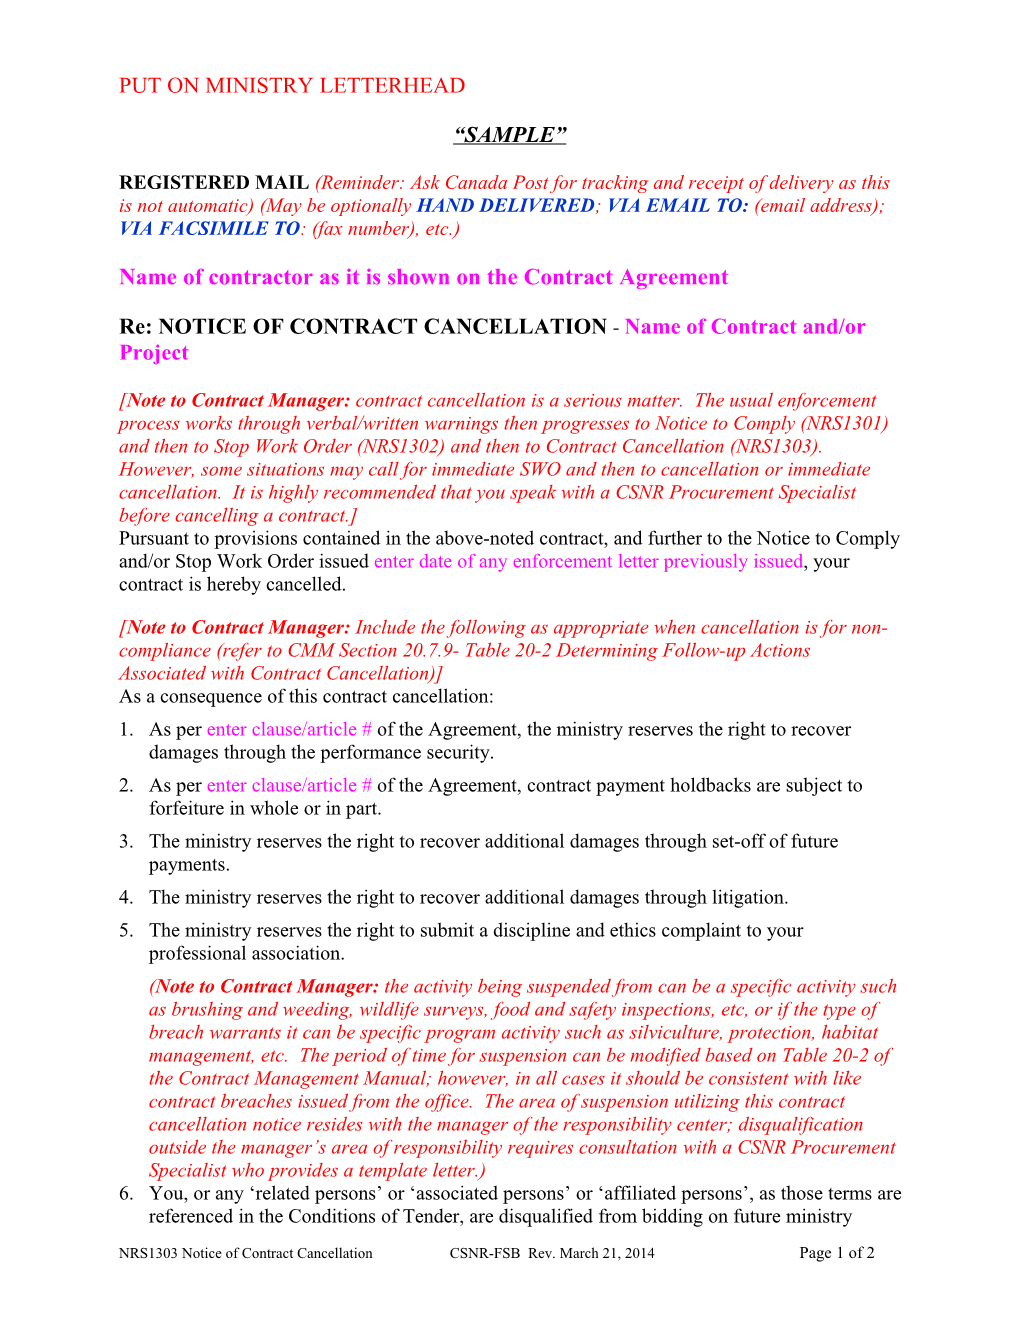 SAMPLE - Notice of Contract Cancellation